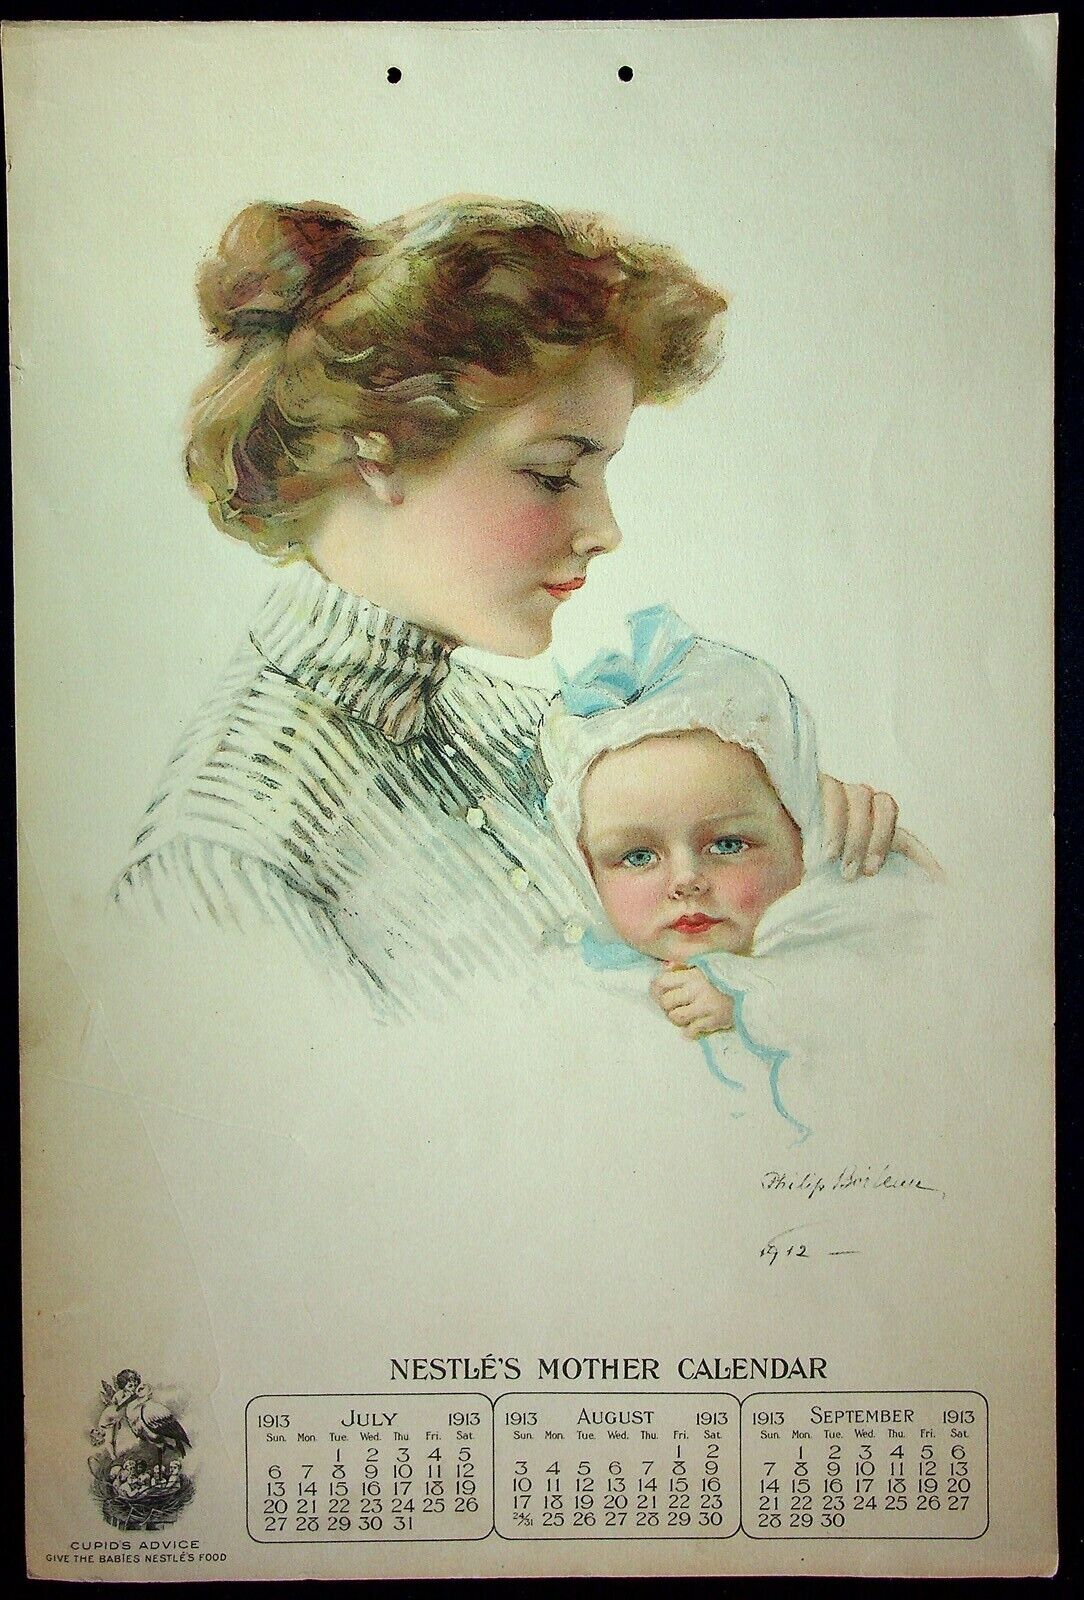 Philip Boileau Illustrated Calendar Page 1913 Nestle's Food Mother & Baby